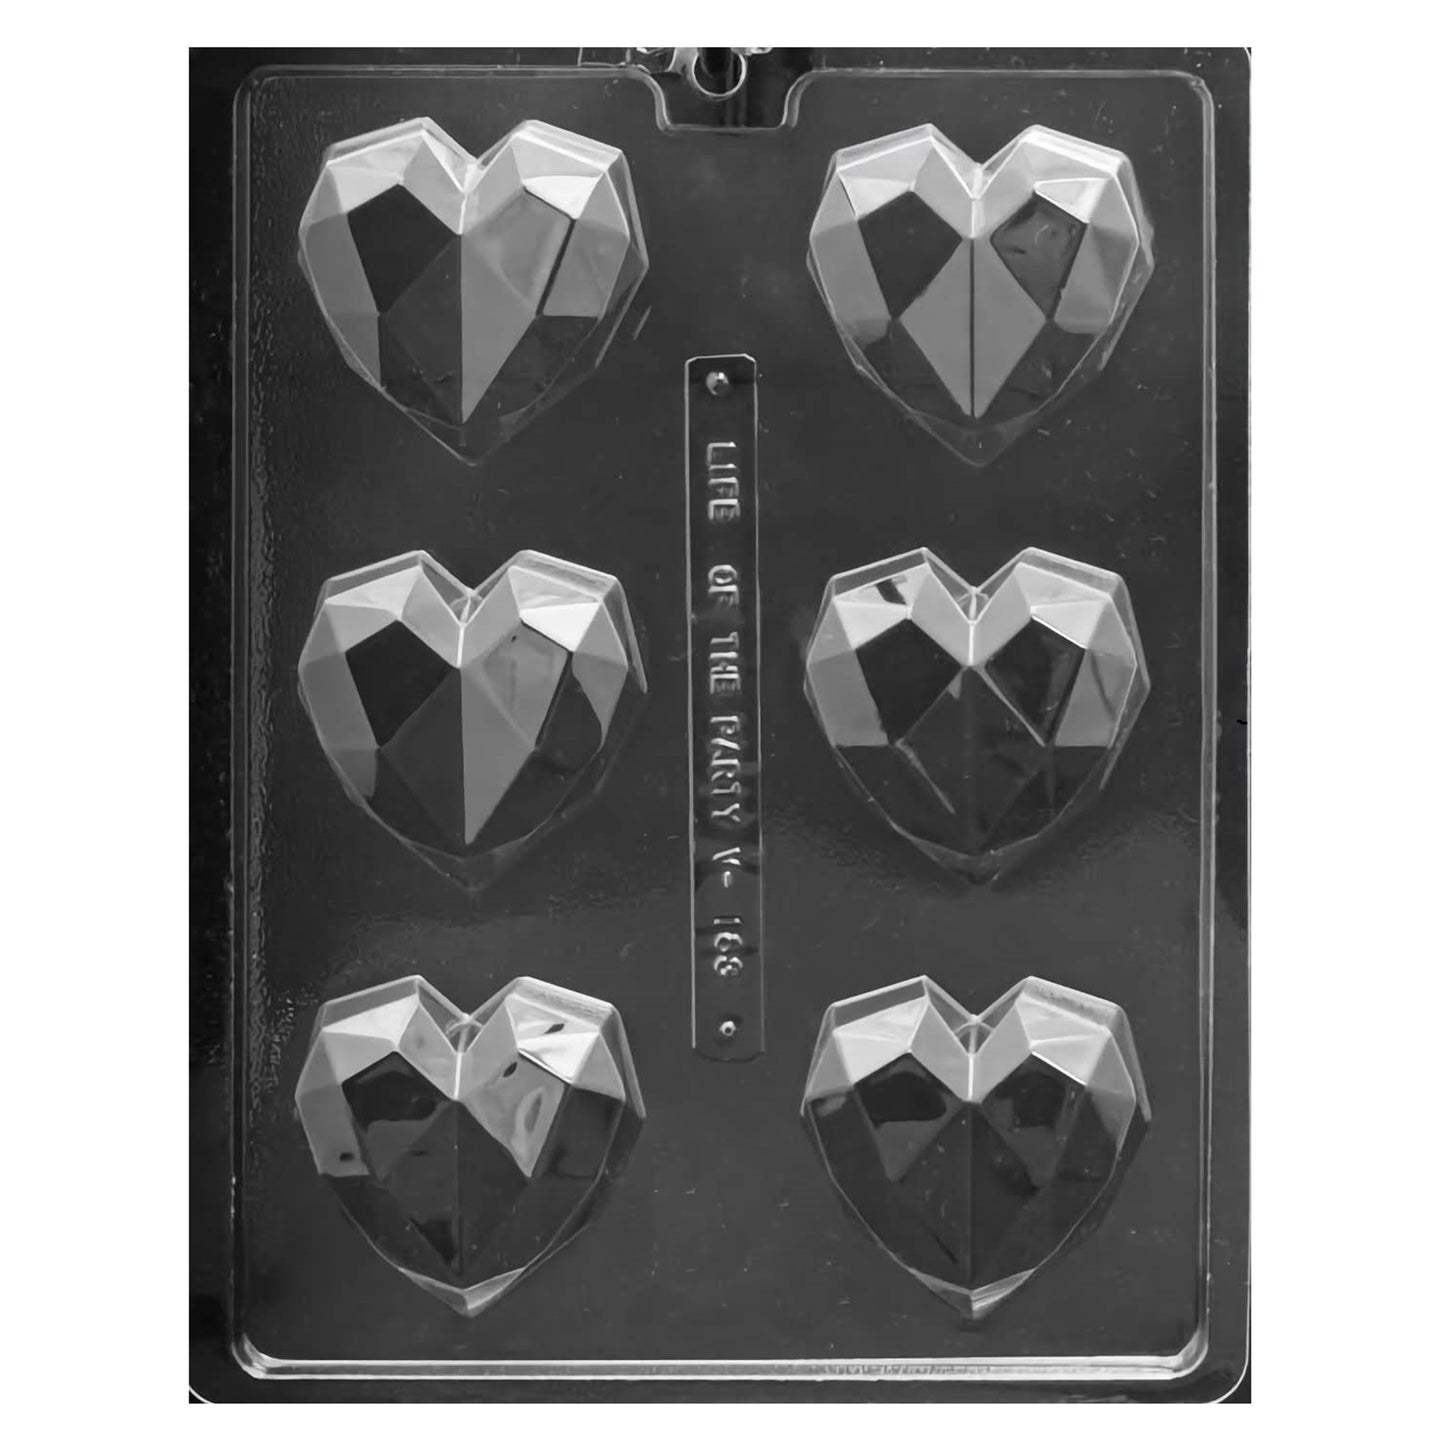 Chocolate mold with six cavities, each shaped like a geometric heart with faceted surfaces, designed for creating dimensional heart-shaped chocolates with a modern twist.